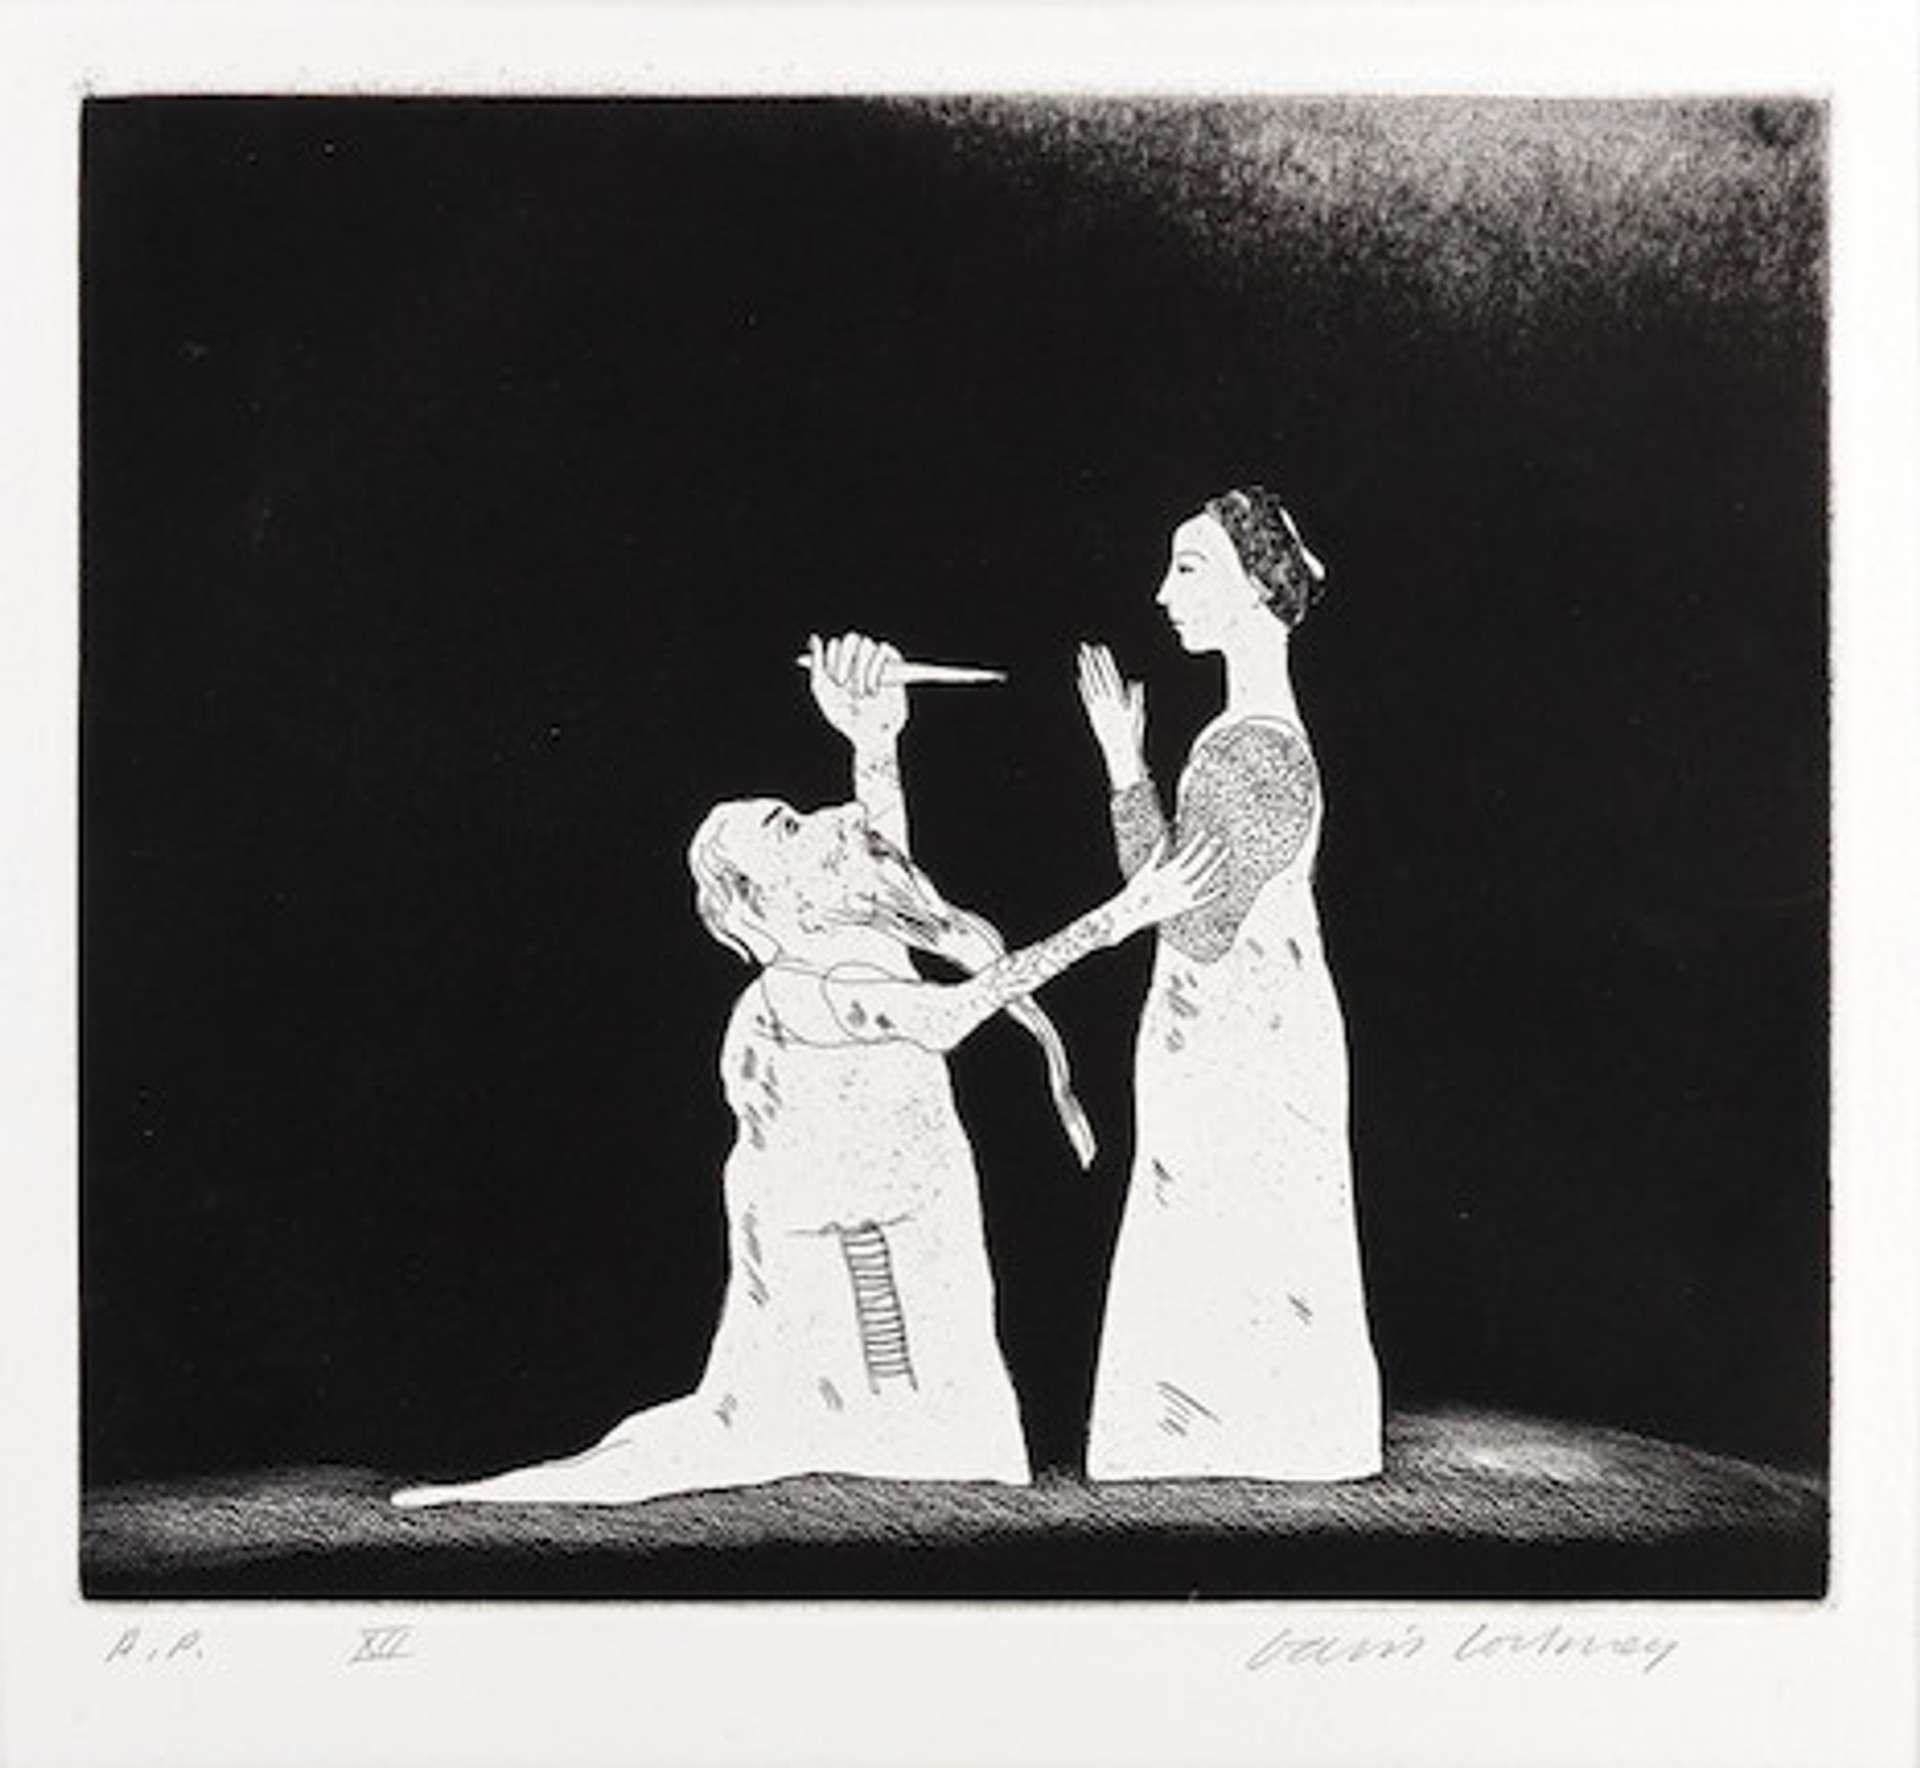 A monochromatic etching by David Hockney depicting a man on his knees holding up a knife to a woman in a dress to the right of the composition.